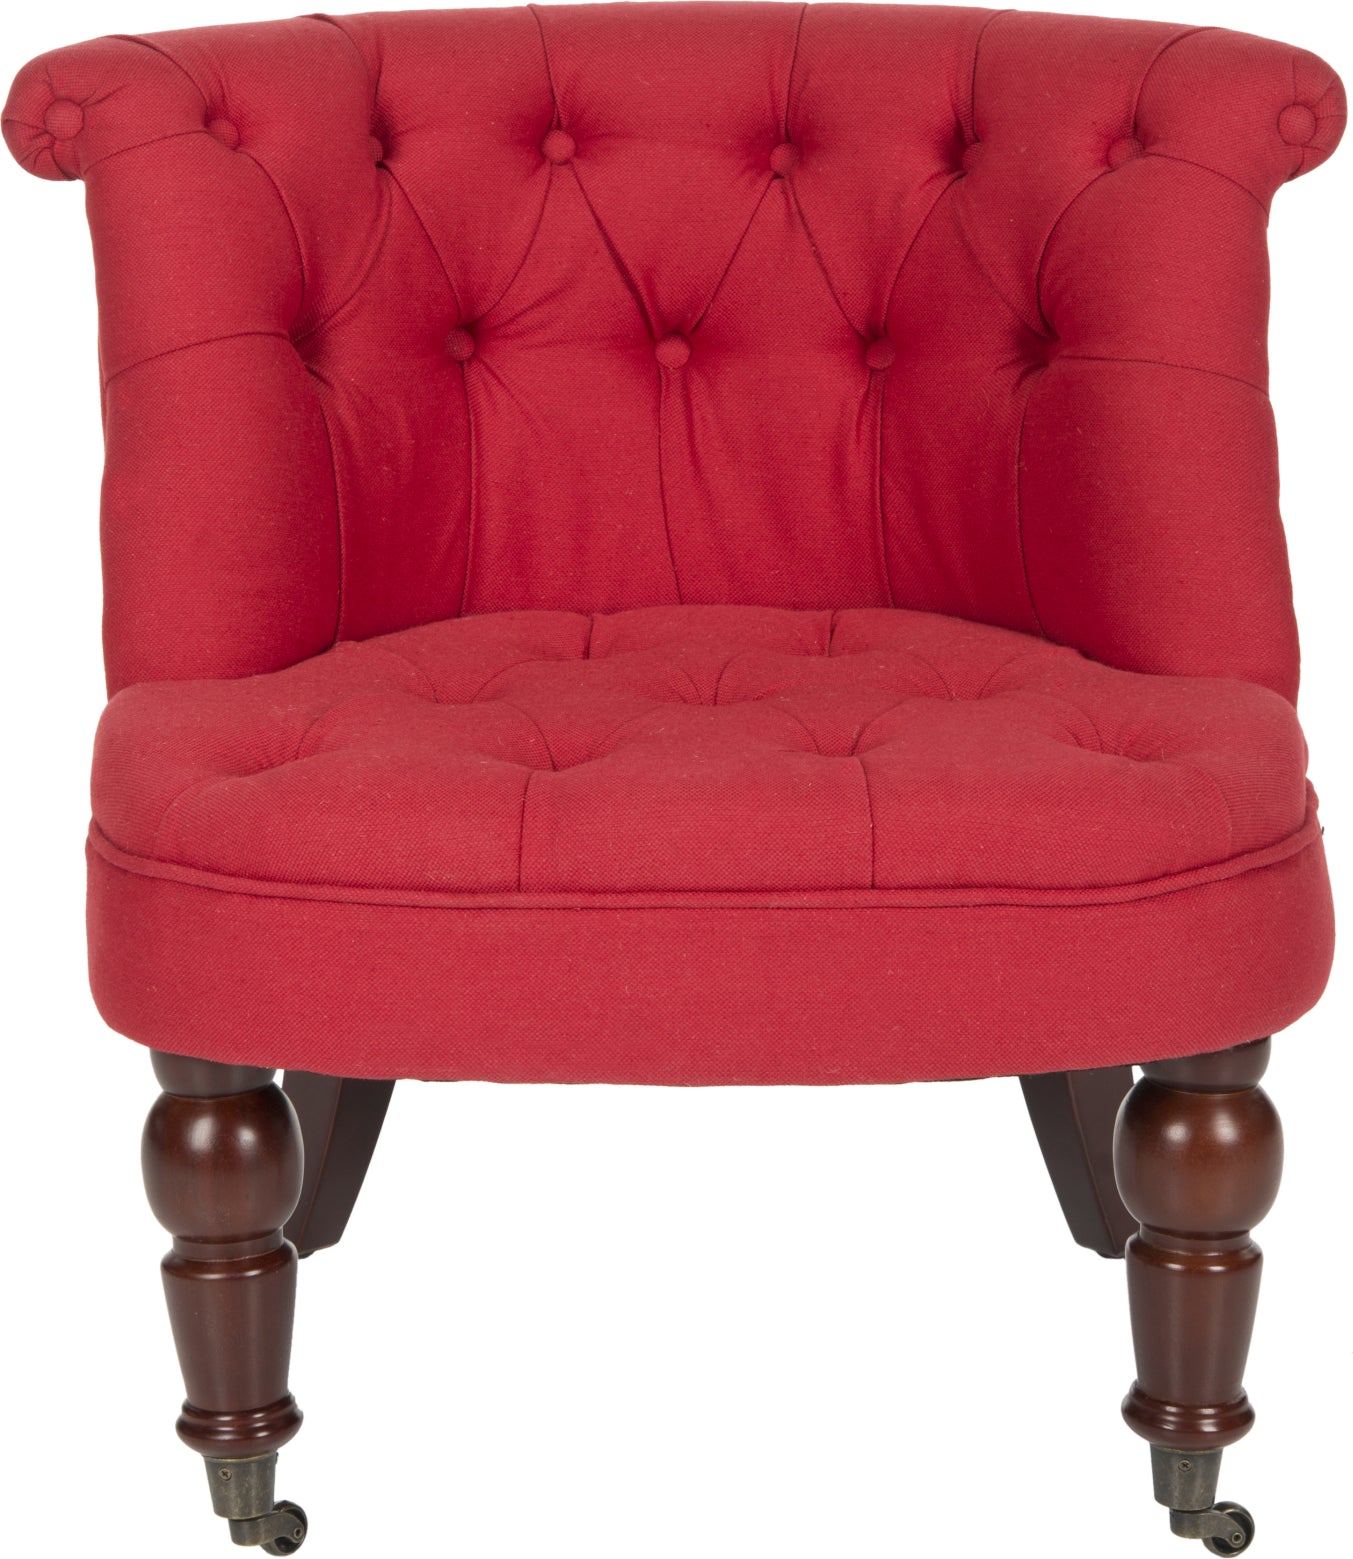 Safavieh Carlin Tufted Chair Cranberry and Cherry Mahogany Furniture main image